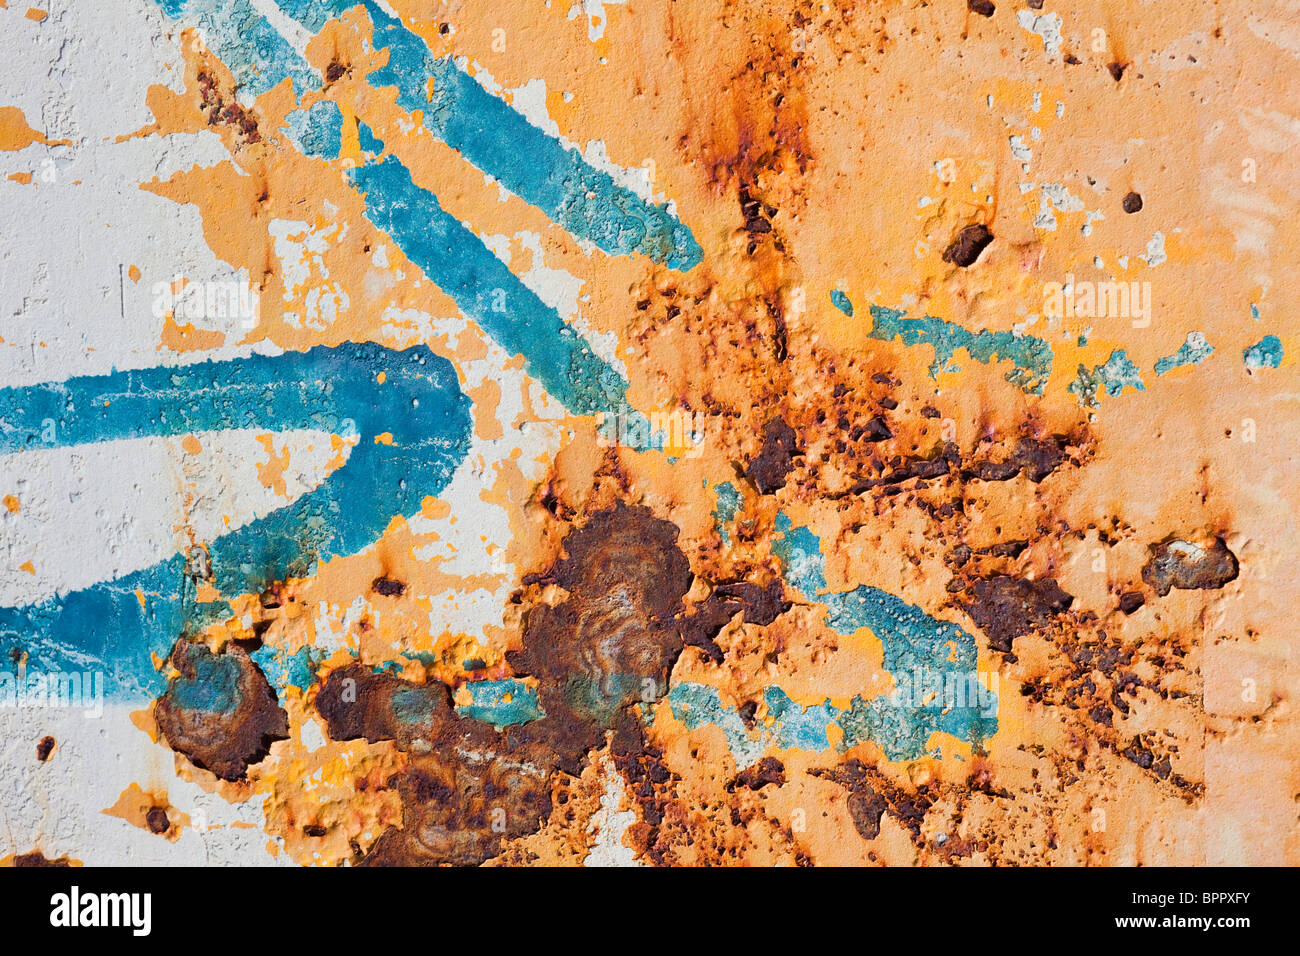 Abstract picture formed by rust and graffiti on sheet of metal Stock Photo